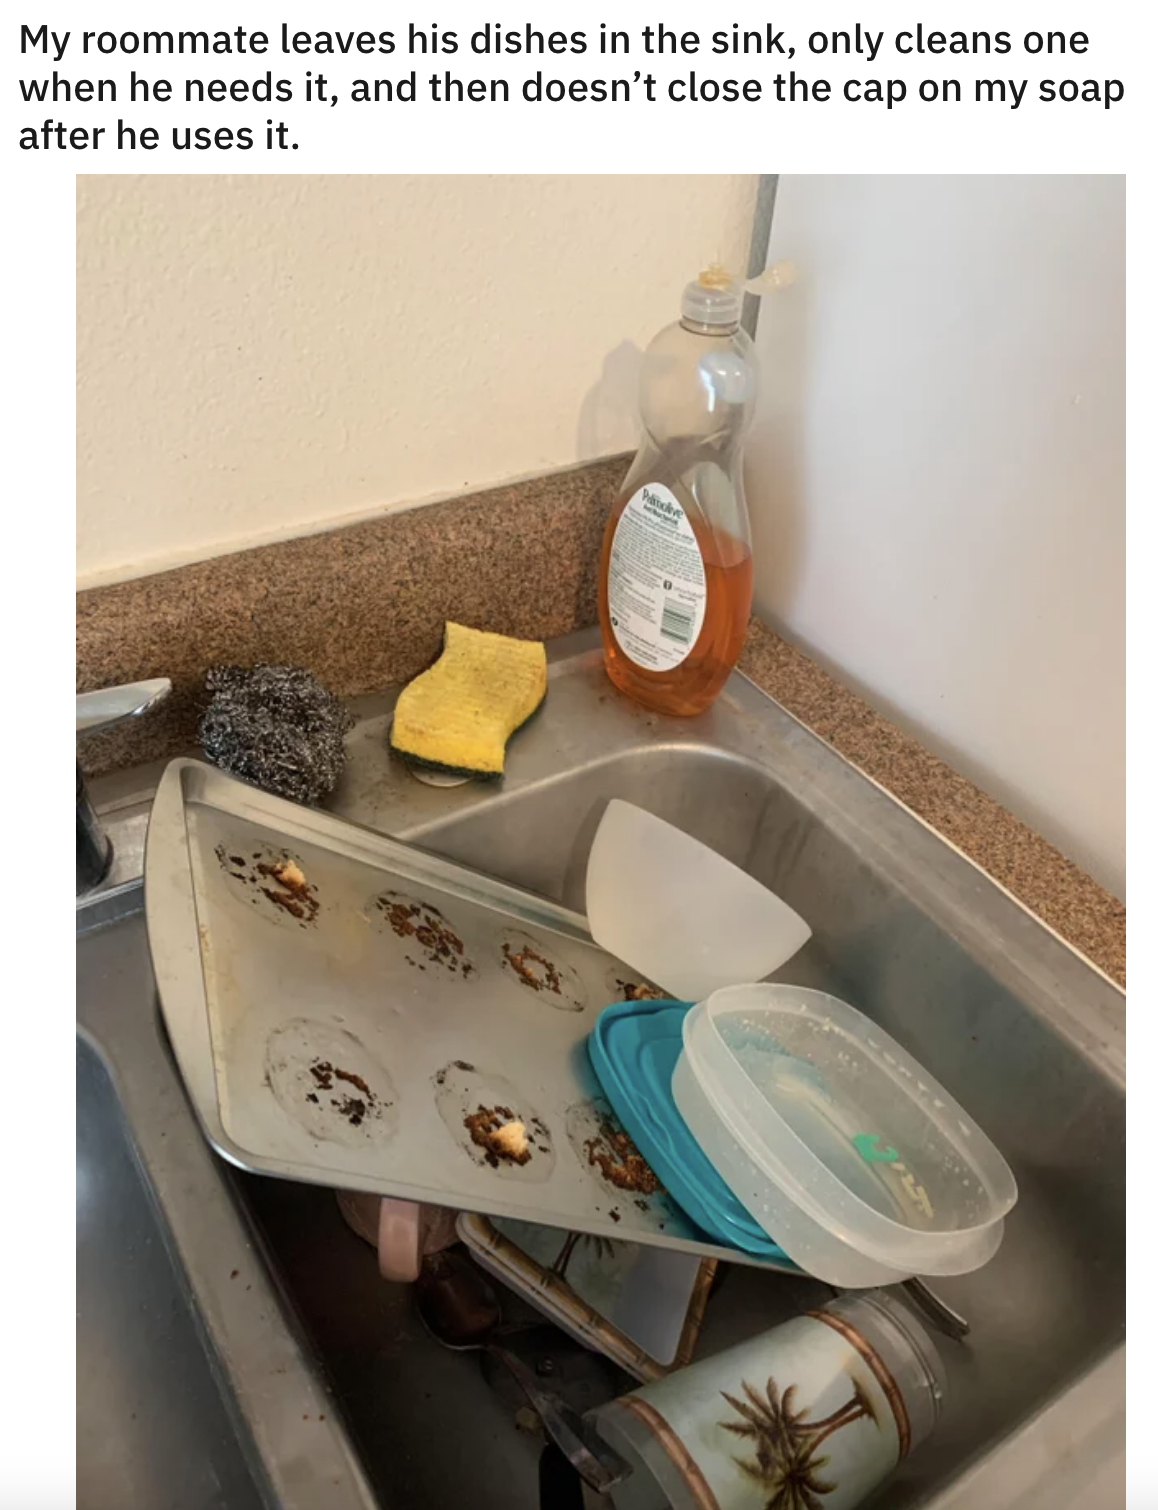 pile of dishes in the sink